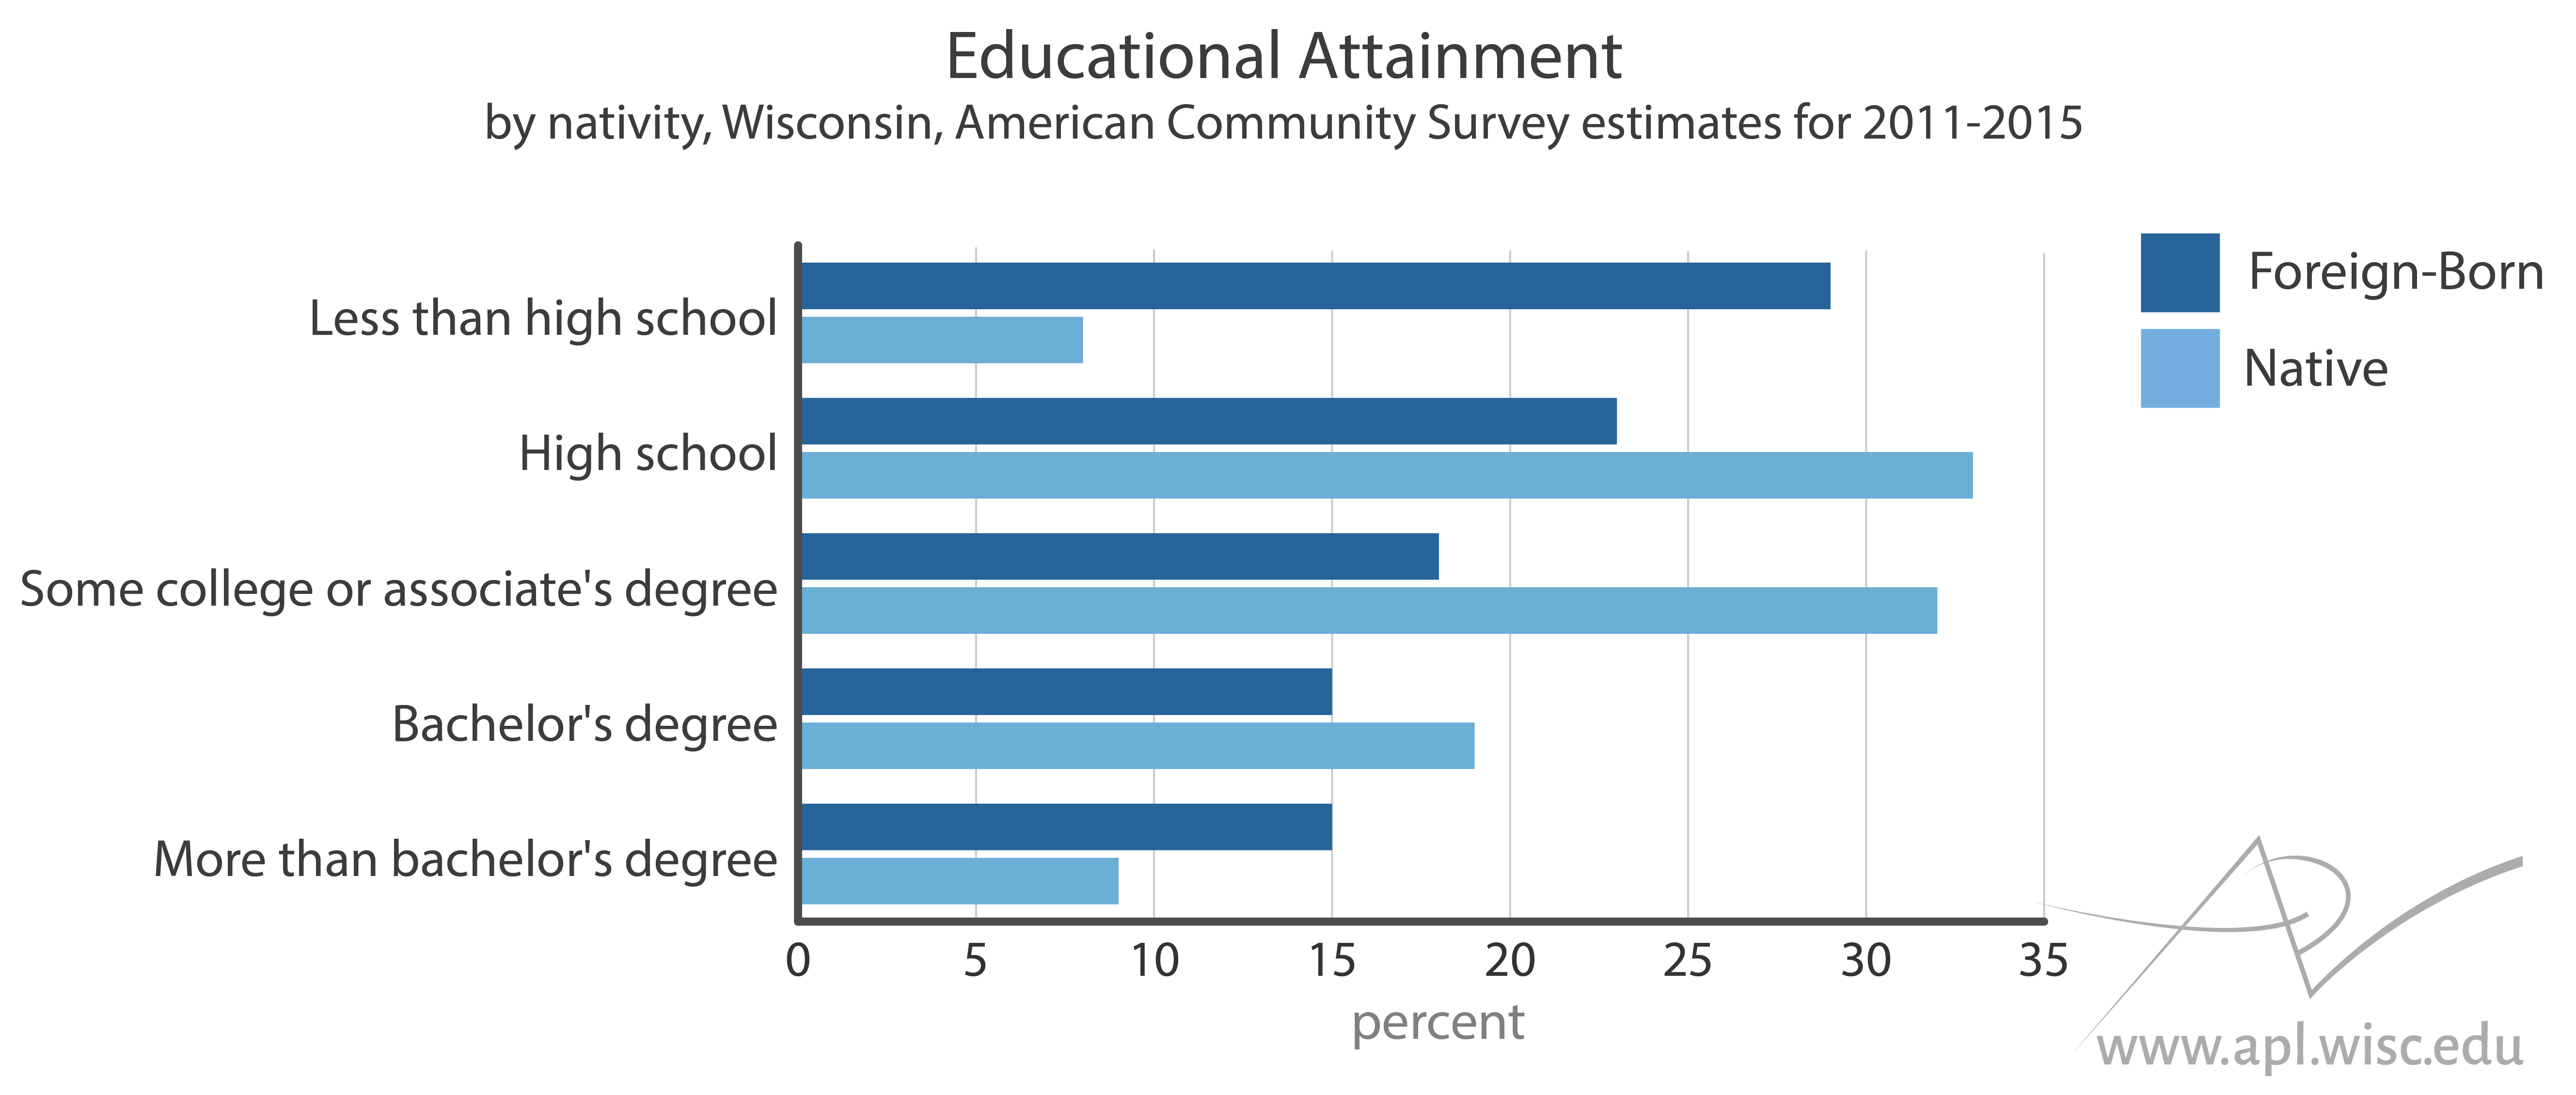 chart showing educational attainment for Wisconsin foreign-born and native-born residents